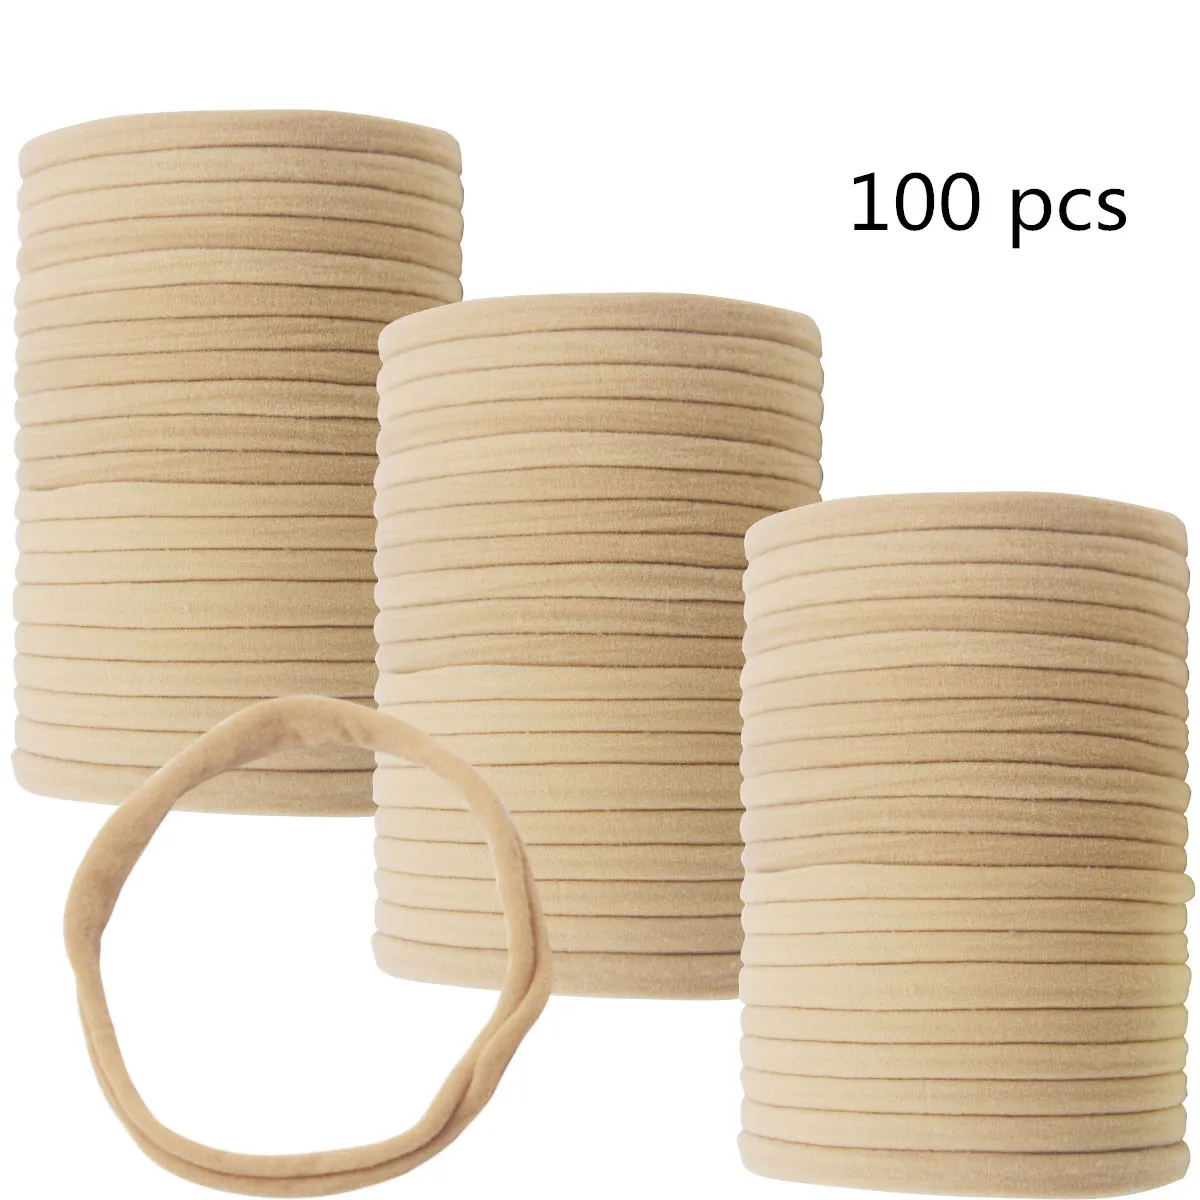 100Pcs Premium Quality Nylon Nude Headbands - Soft and Stretchy for Newborns, Baby and Toddlers Perfect for DIY